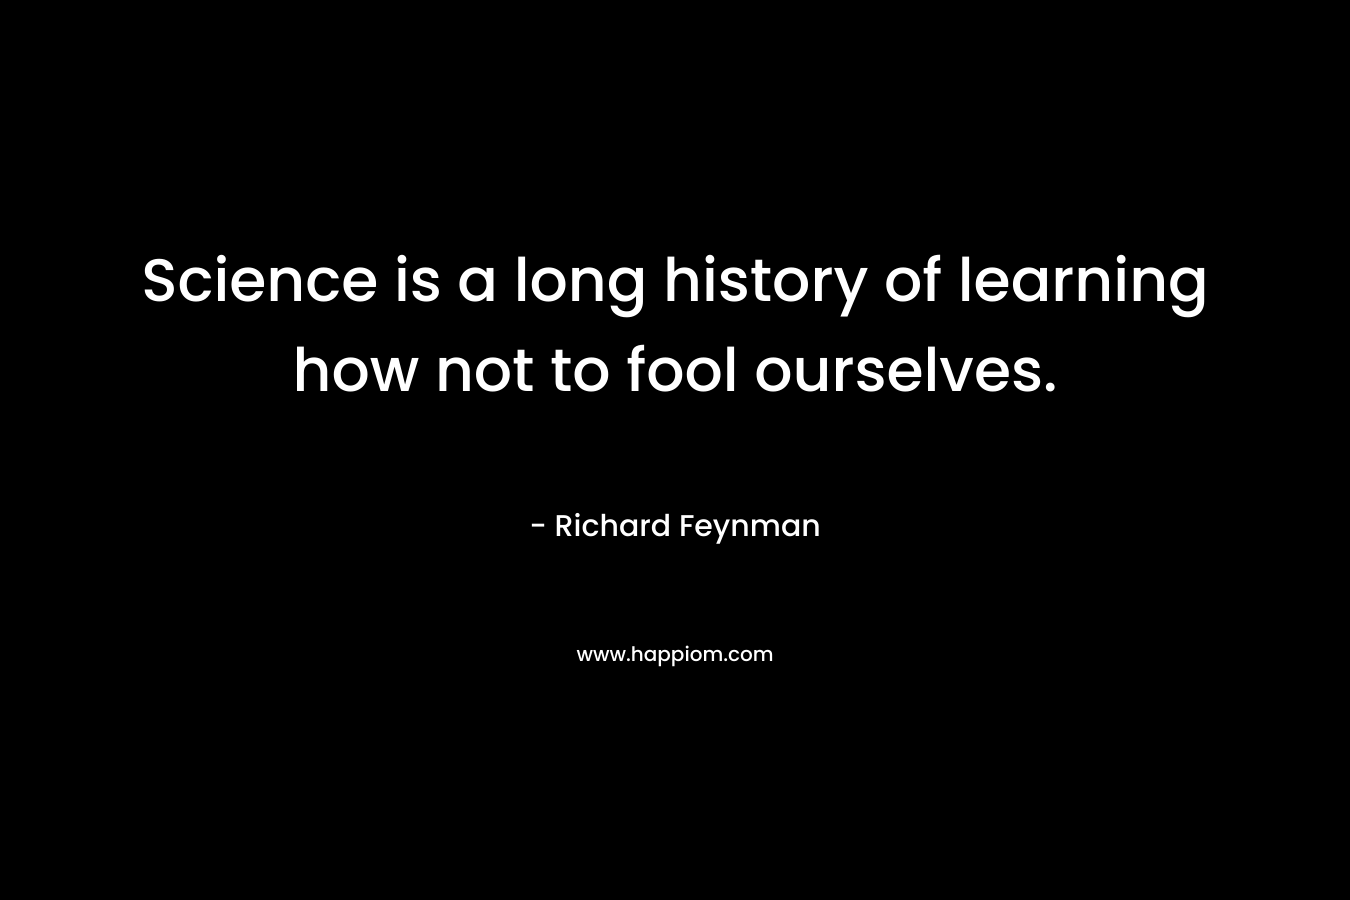 Science is a long history of learning how not to fool ourselves.